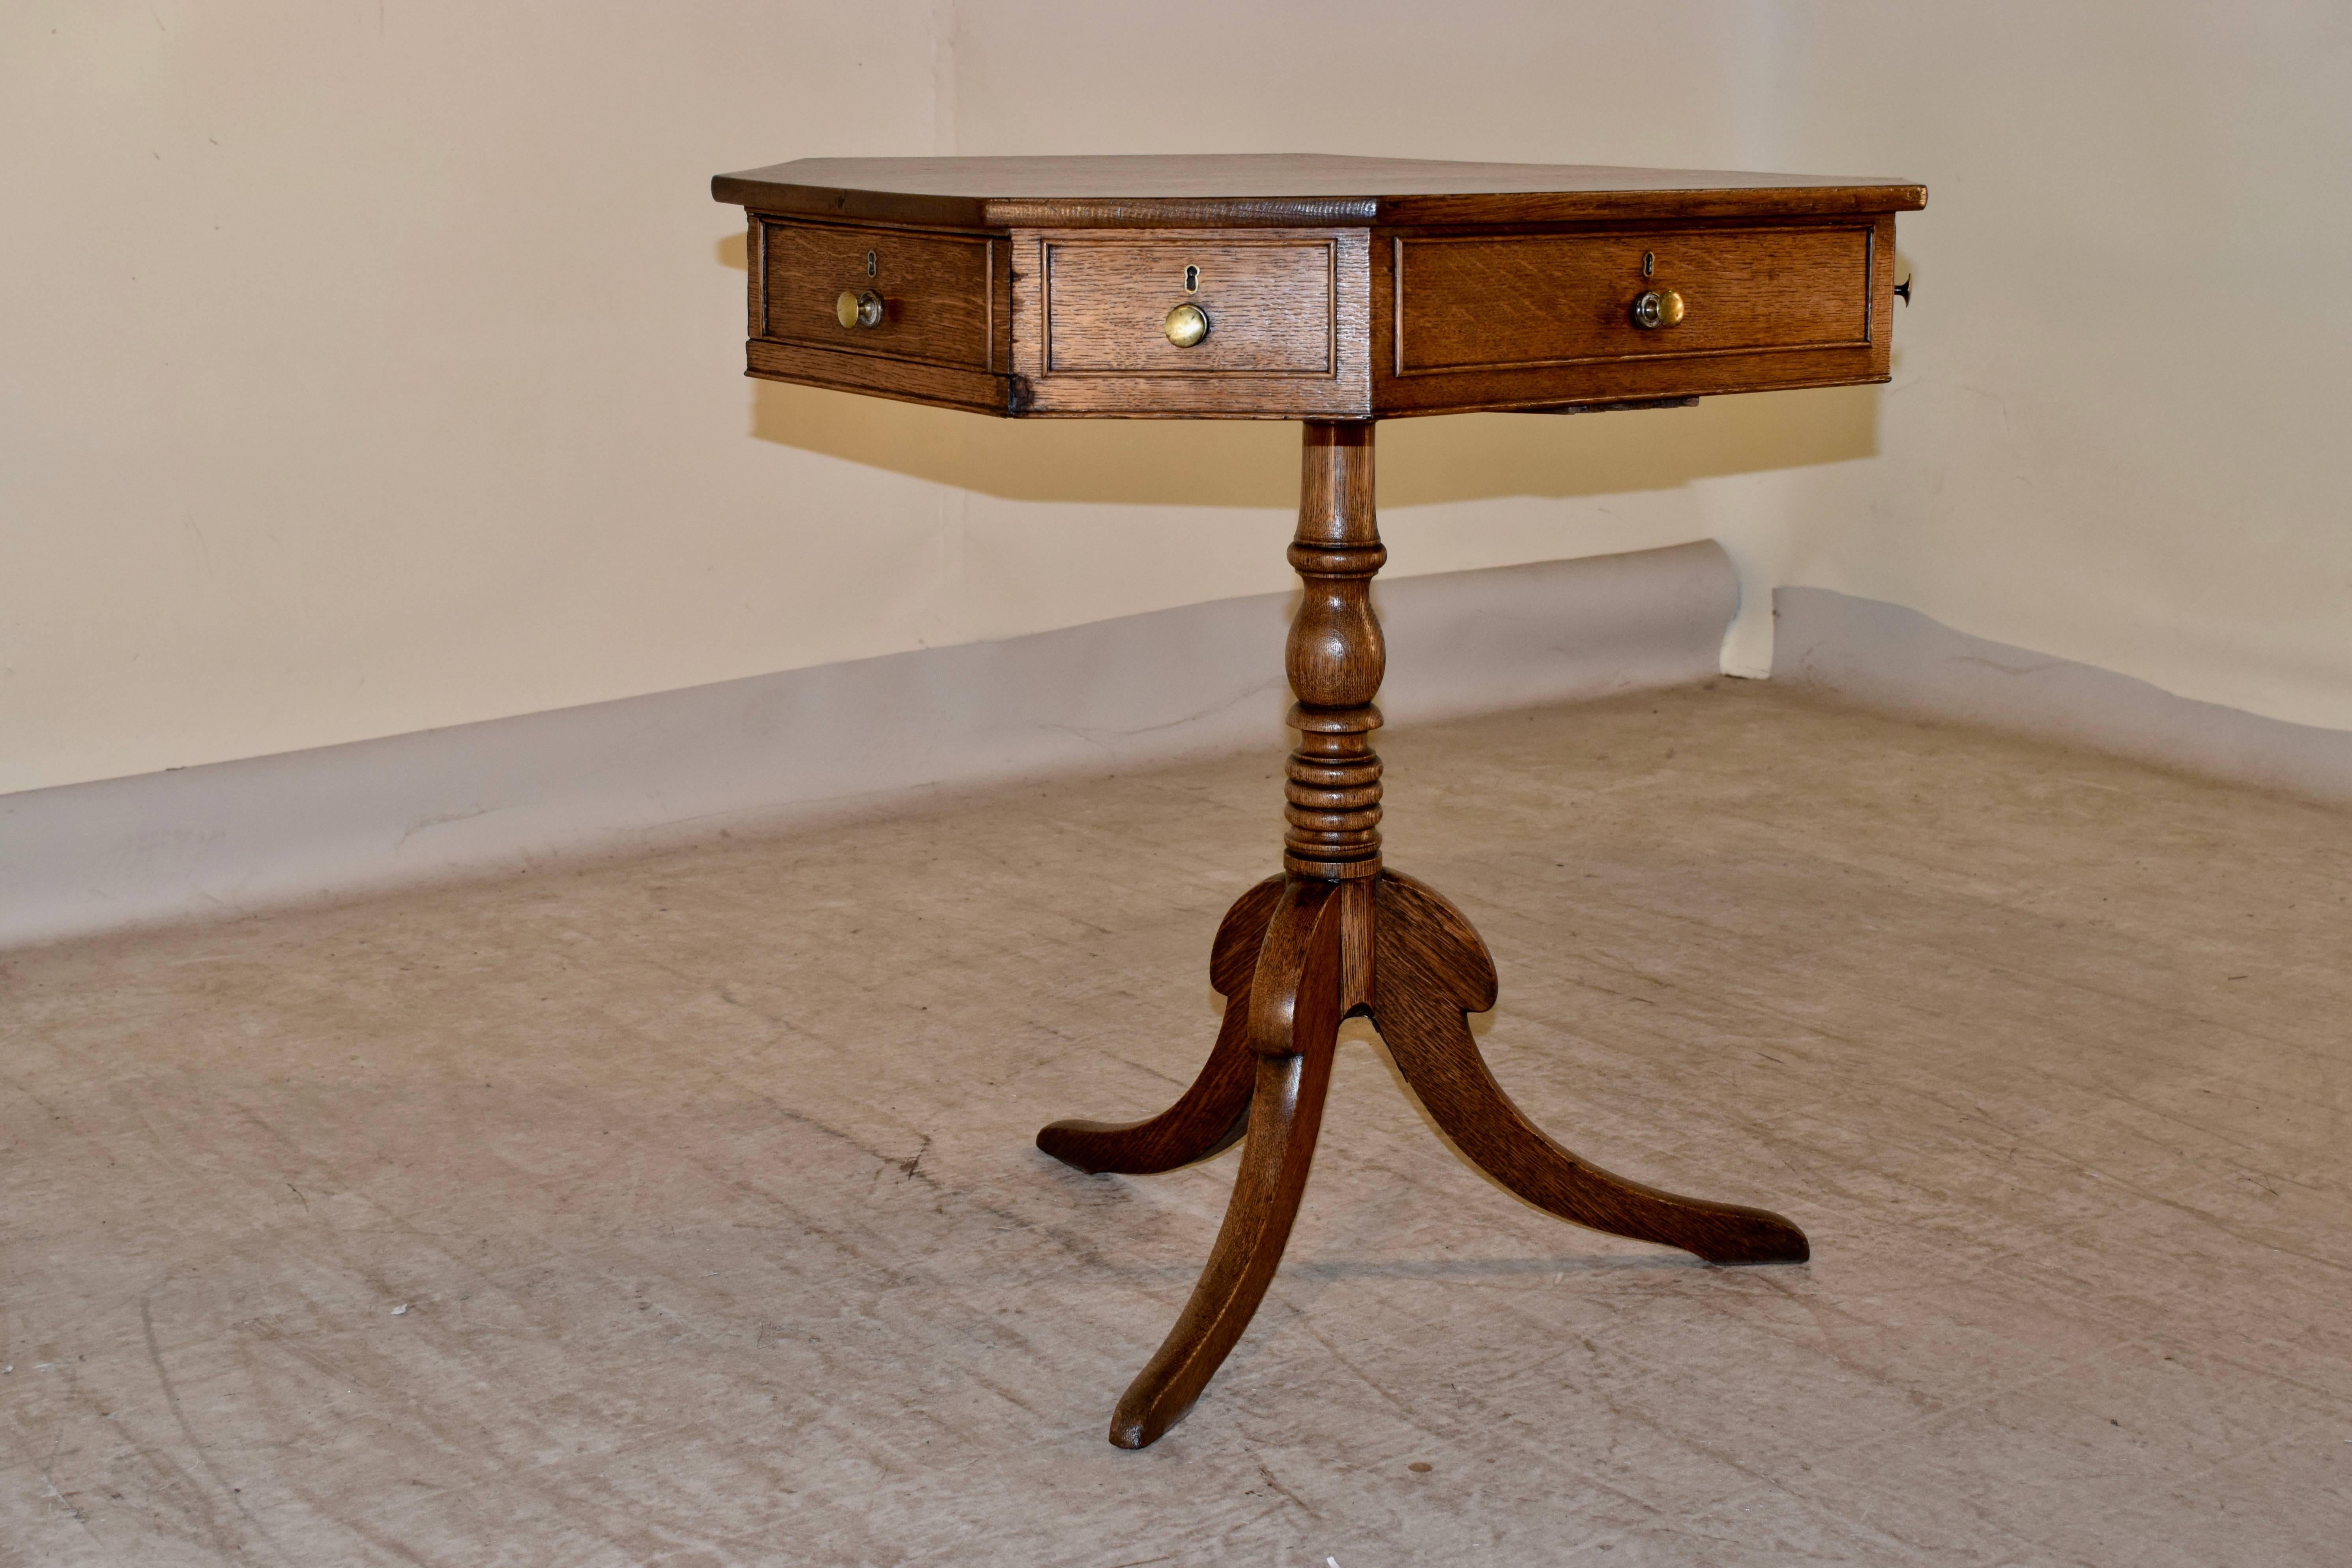 18th century English rent table made from oak. The top is octagonally shaped and follows down to false drawers on the front and back and two functioning drawers on either end. This type of table was called a rent table because that is what is was